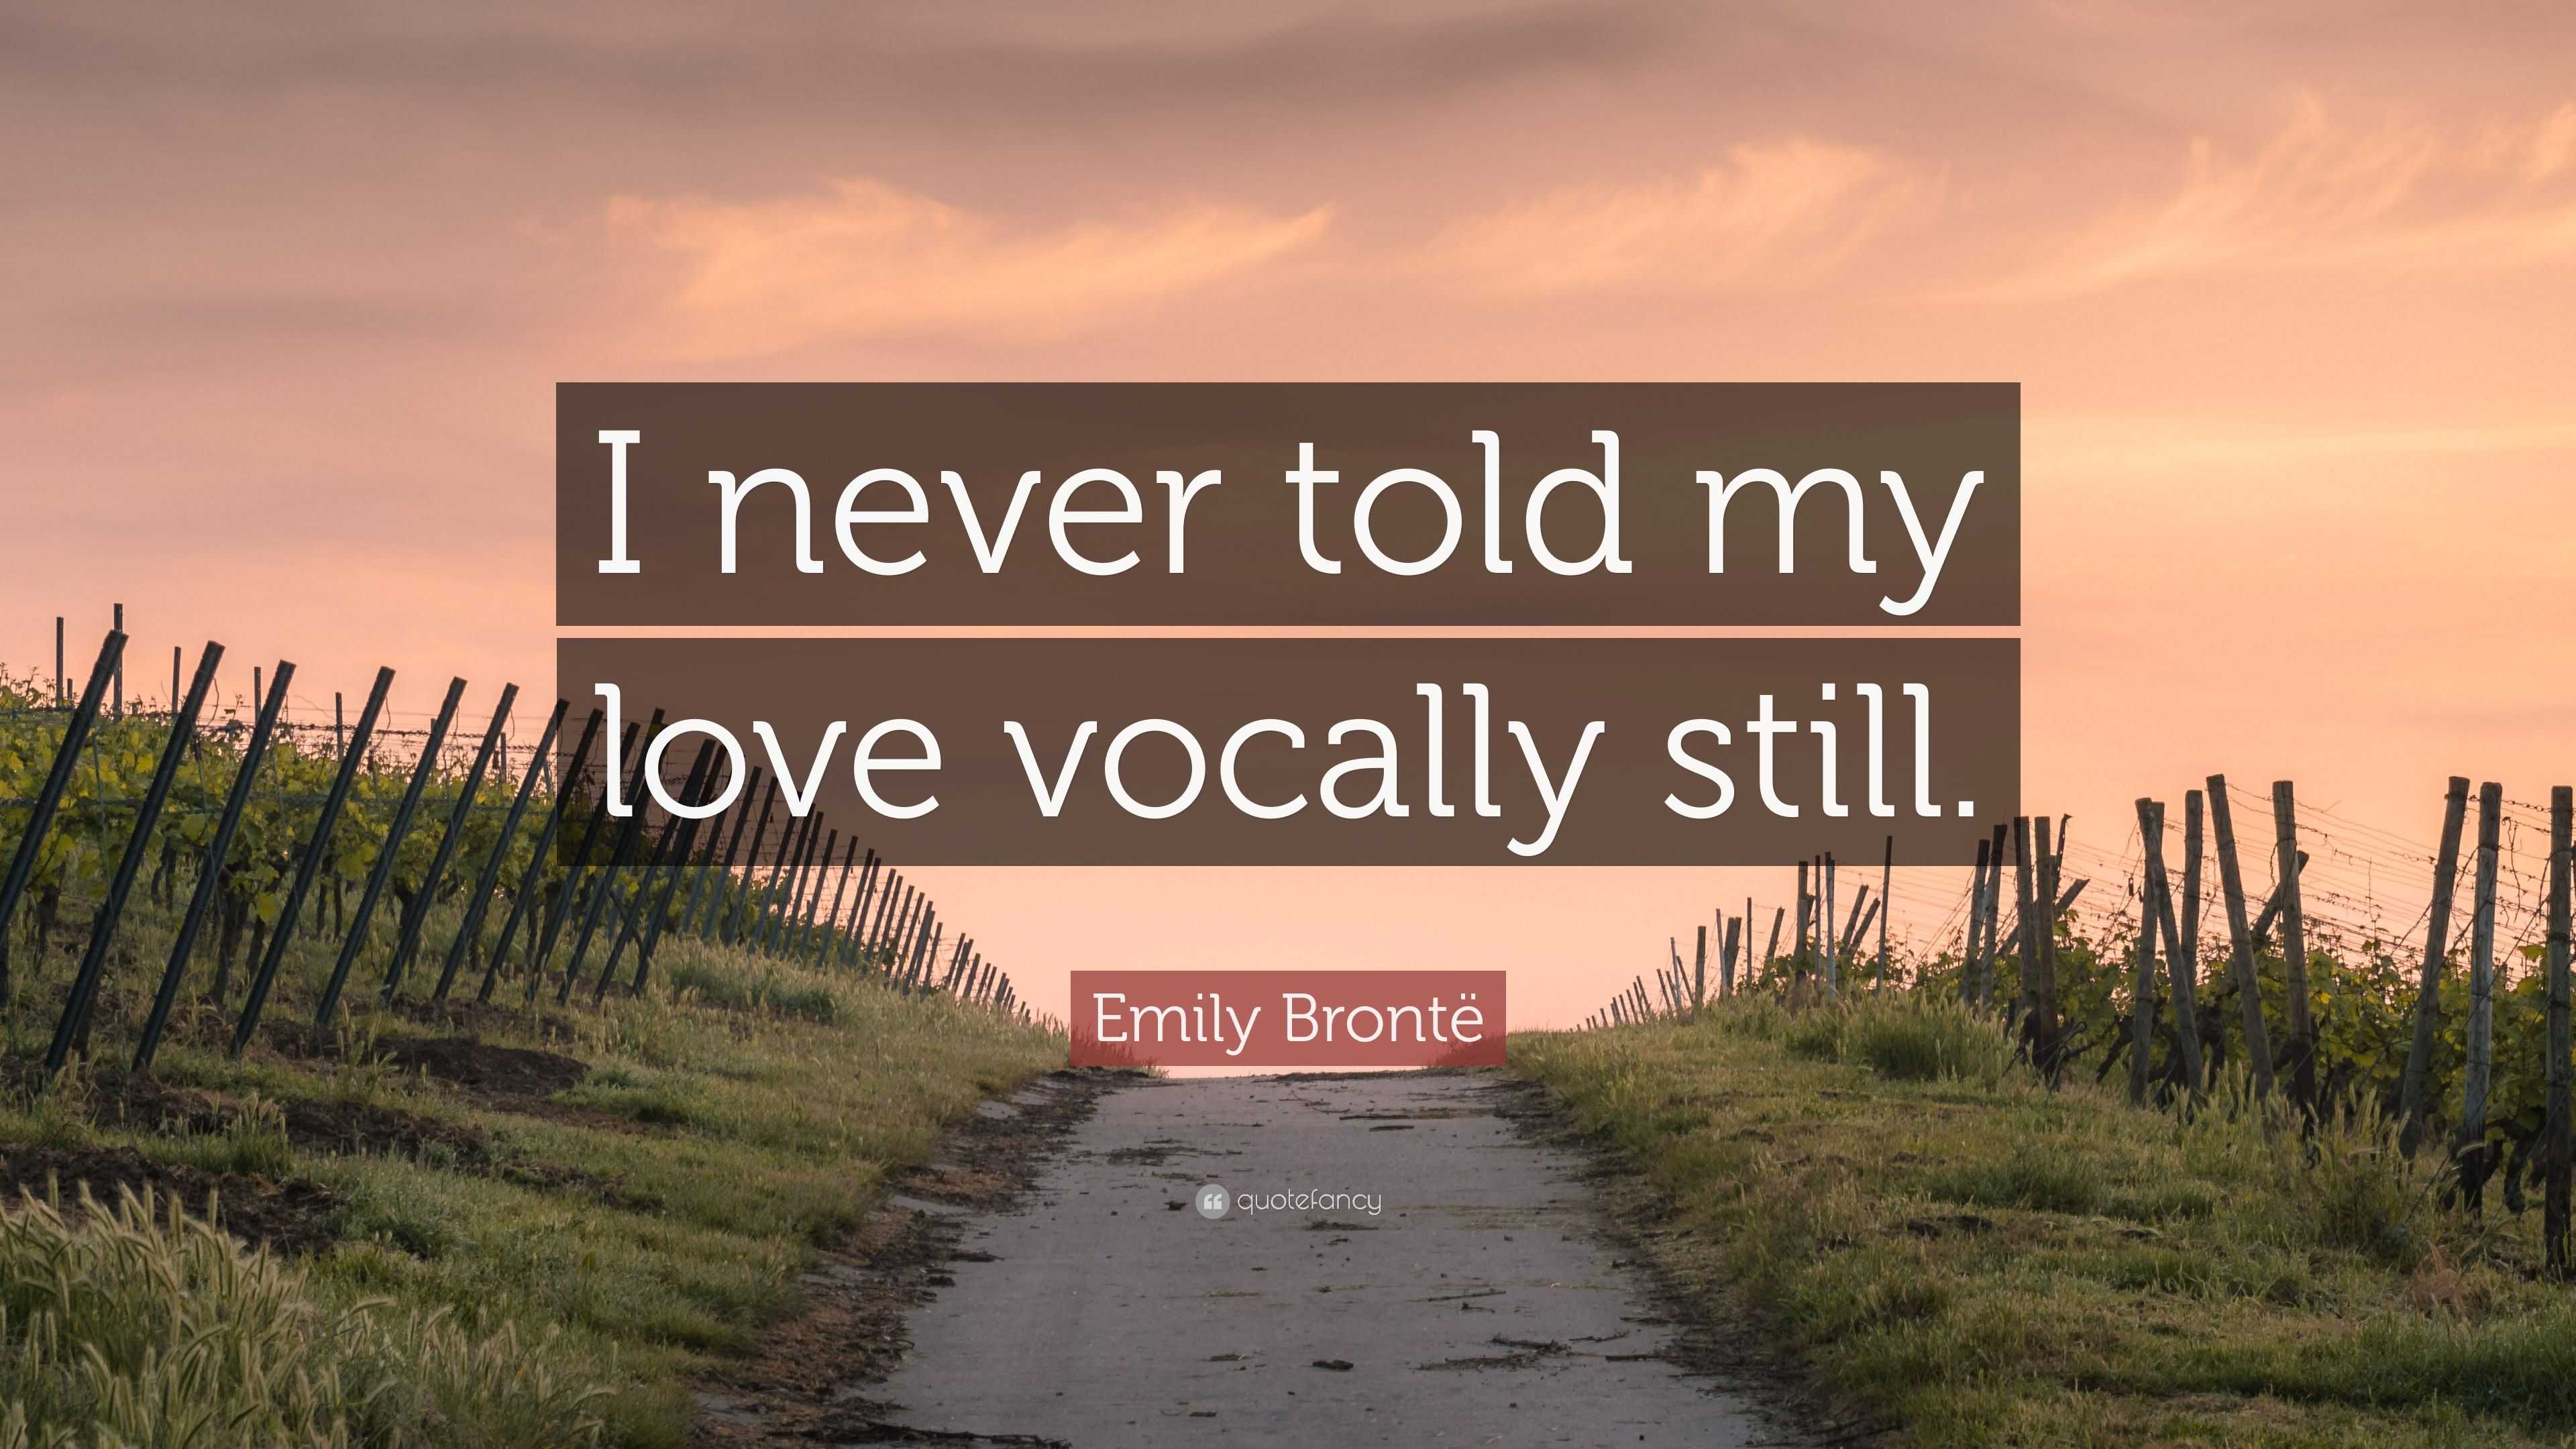 Emily Brontë Quote: “I never told my love vocally still.”